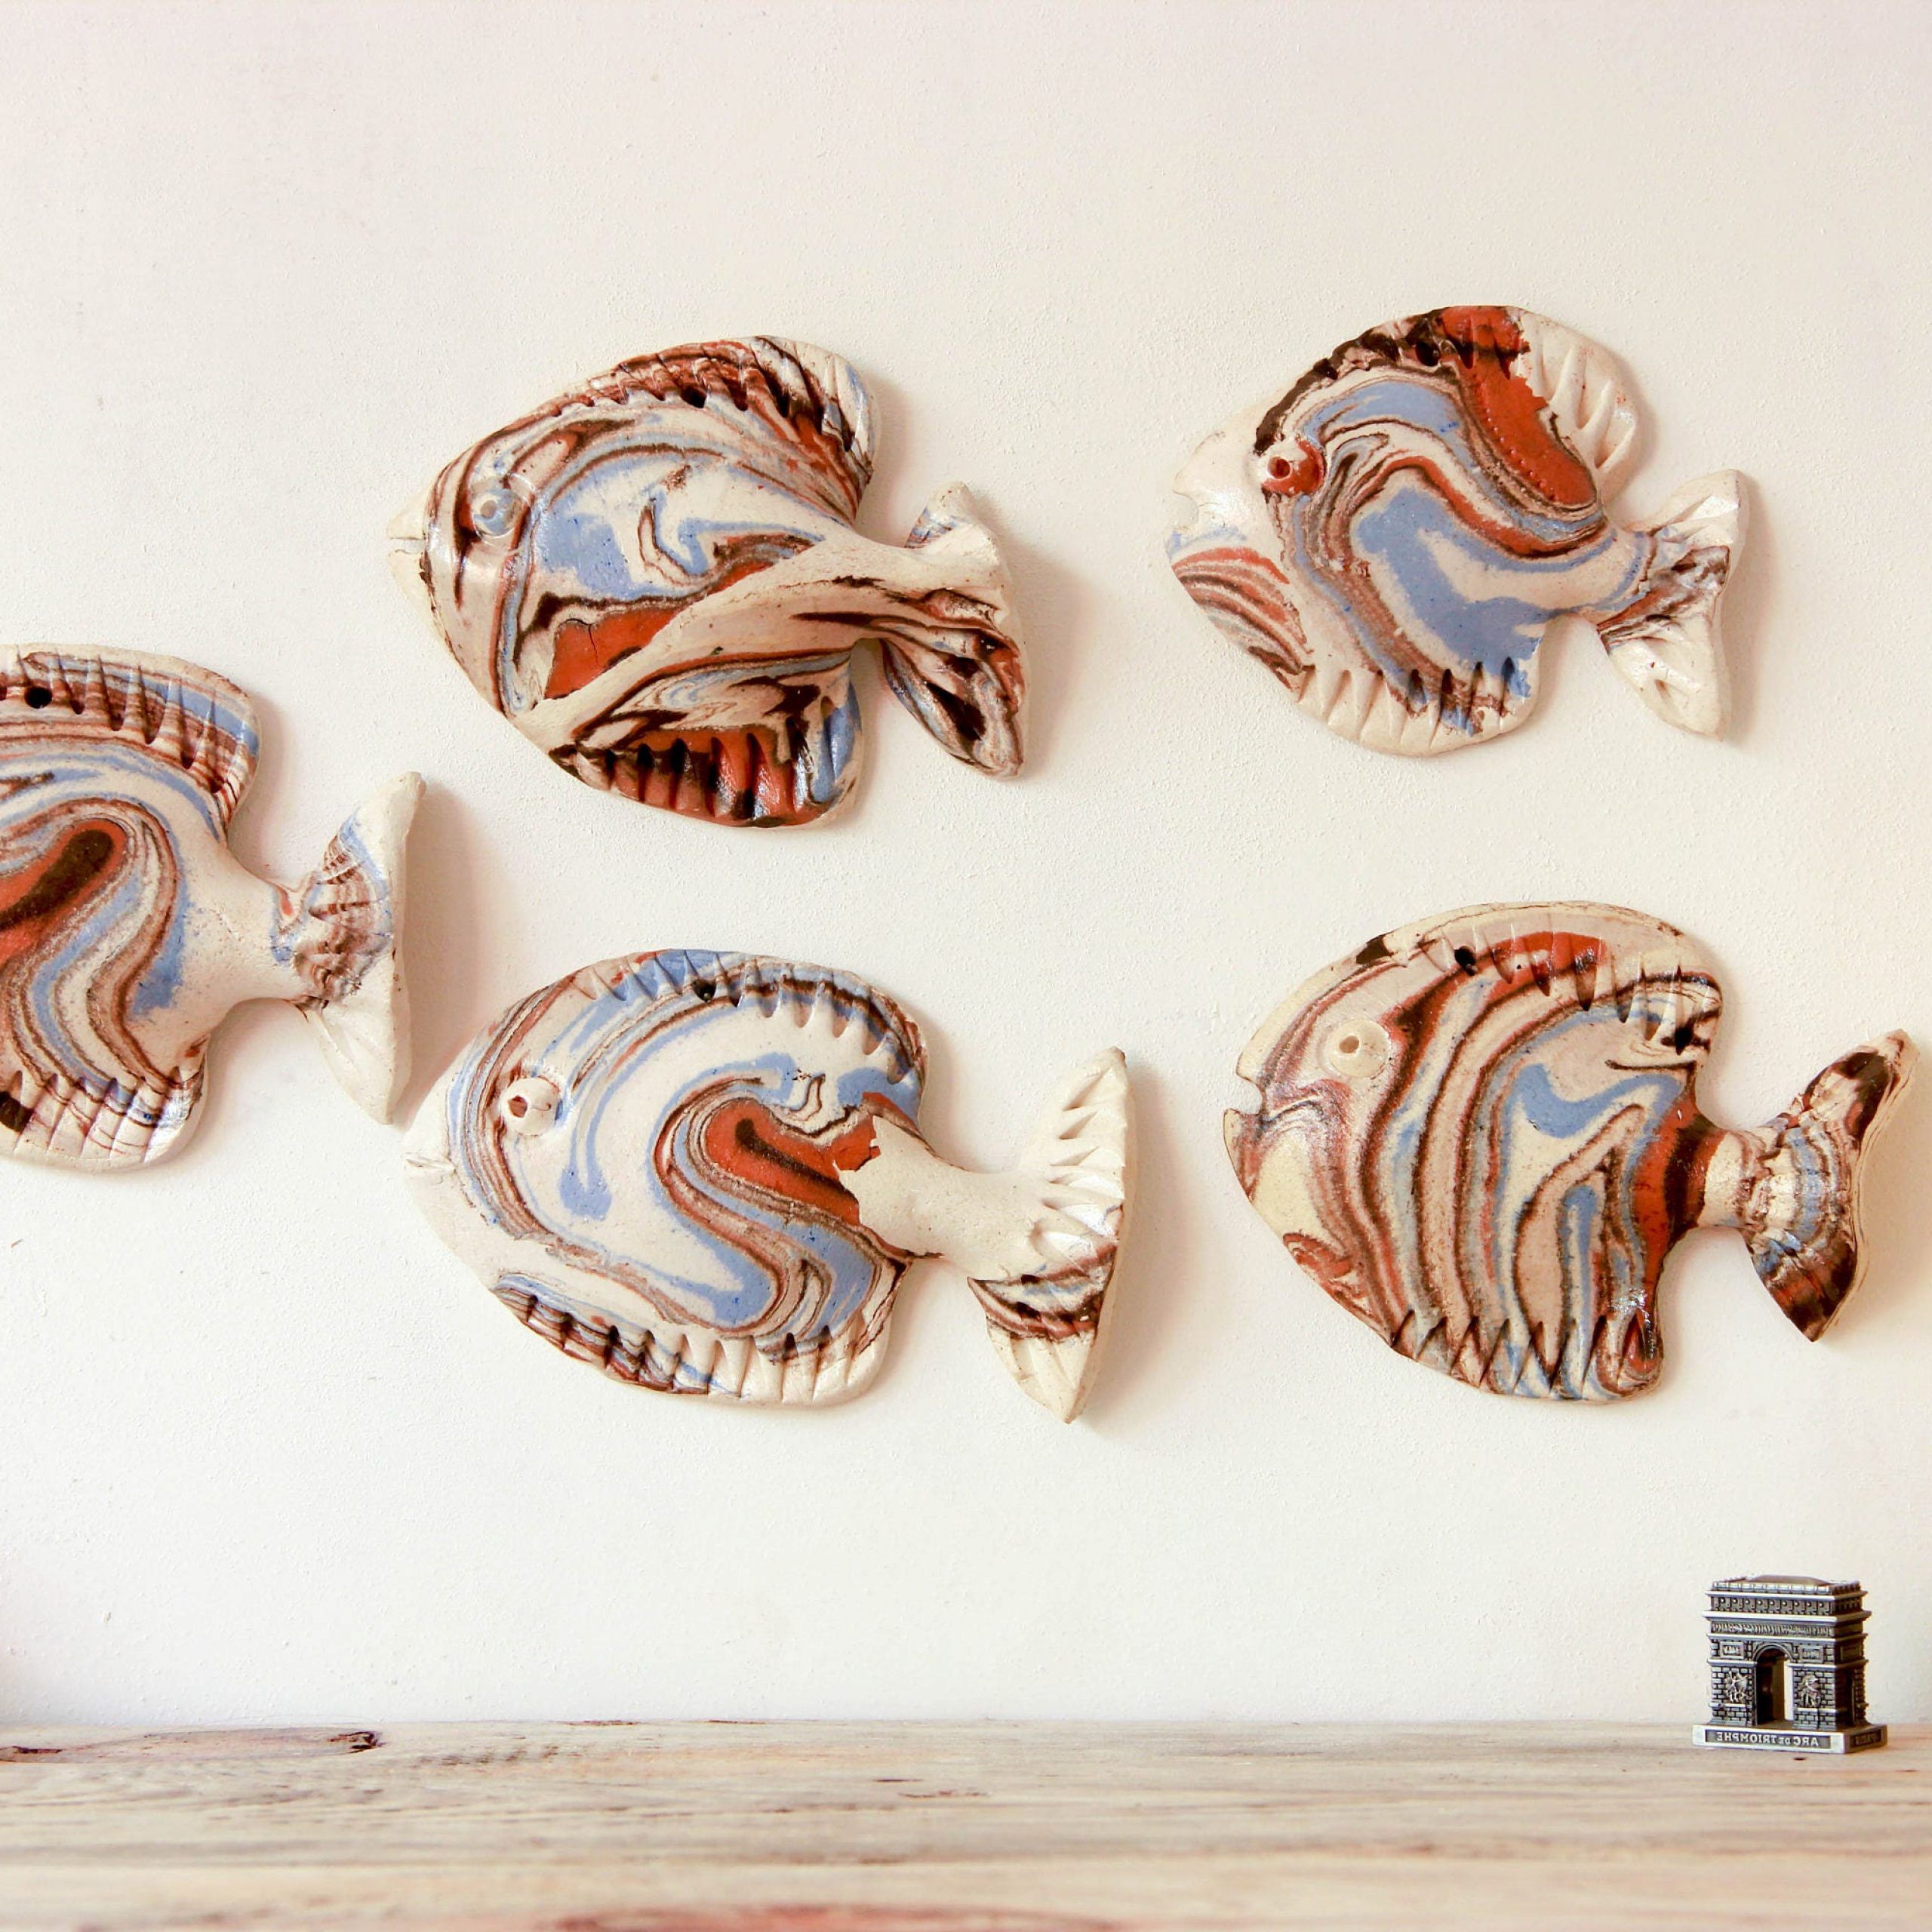 Preferred Fish Wall Art Intended For Set Of 5 Fish School Wall Decor Ceramic Fish Sculpture 3d (View 7 of 15)